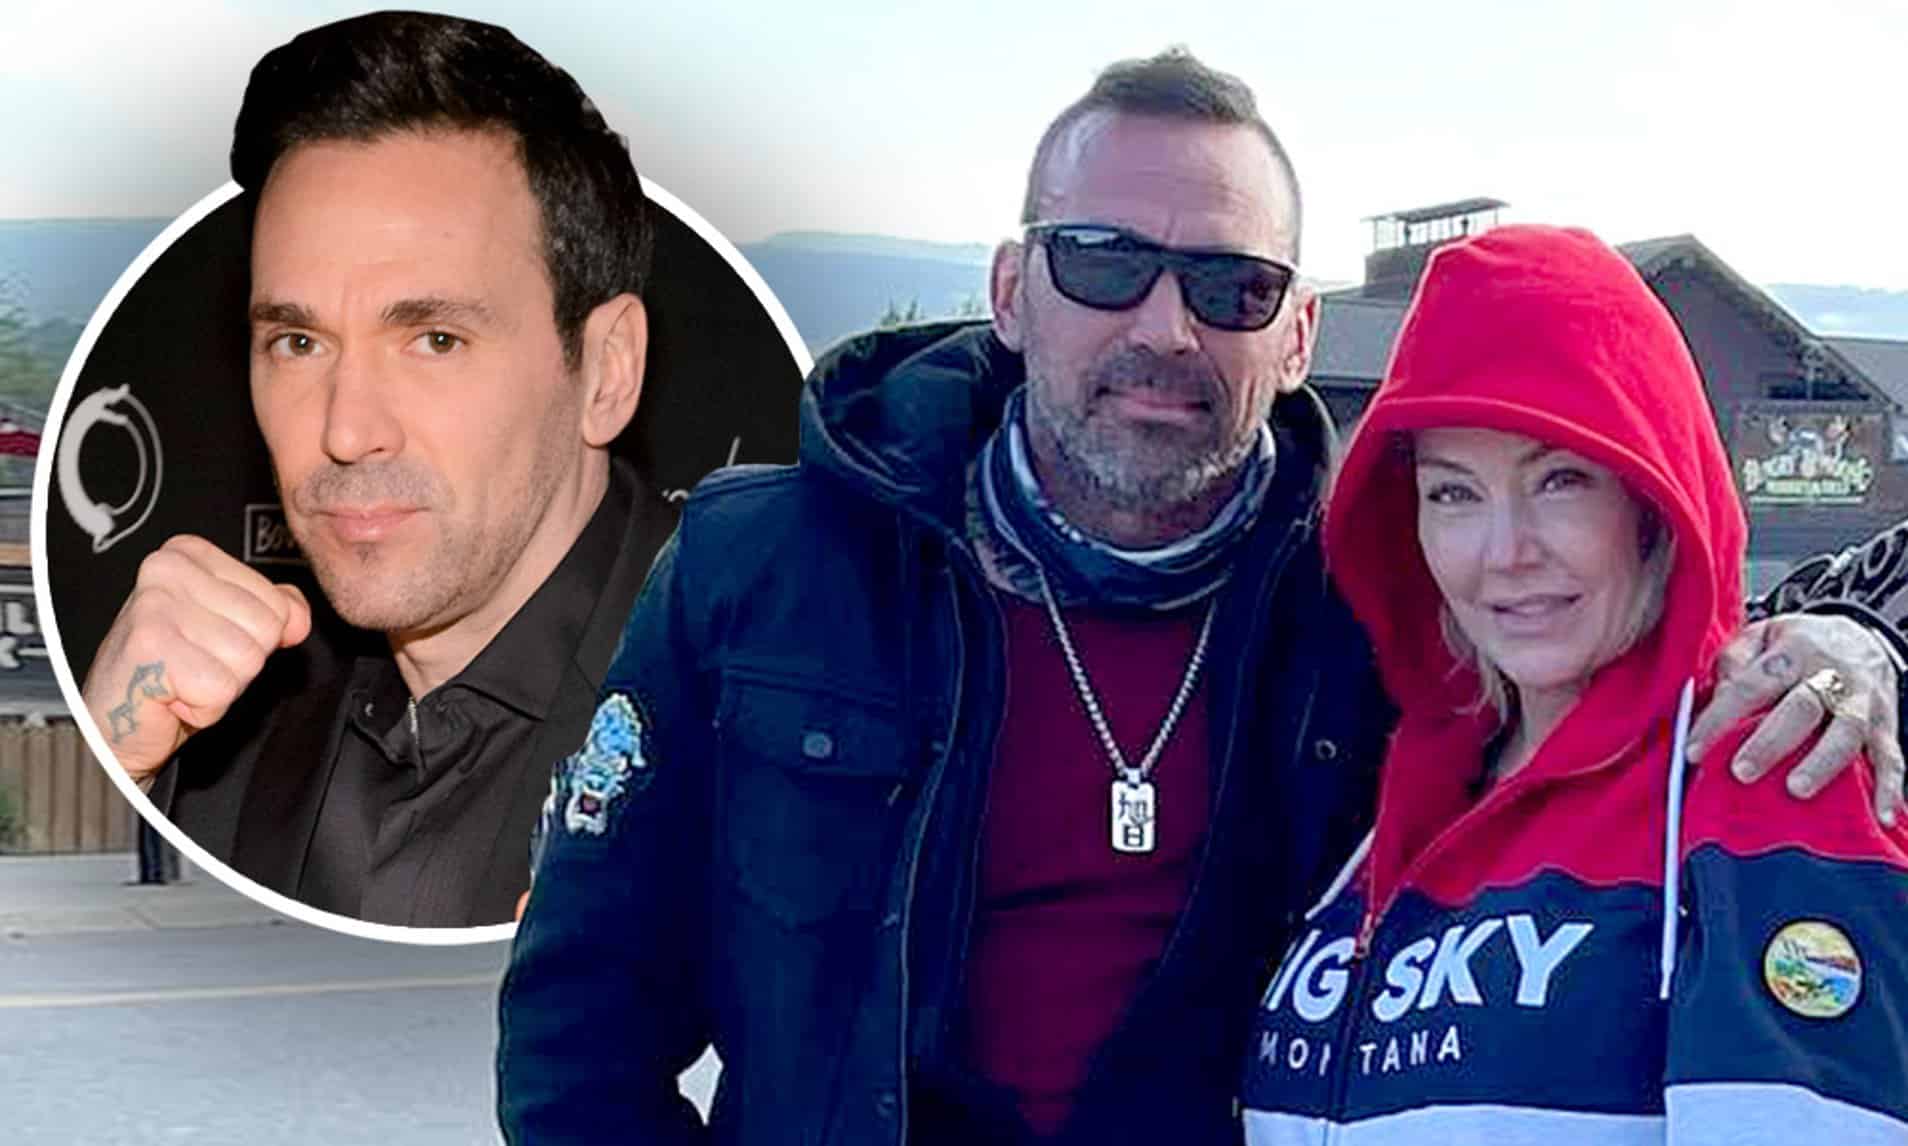 Power Rangers star Jason David Frank's wife Tammie accuses him of cheating  as she files for divorce | Daily Mail Online